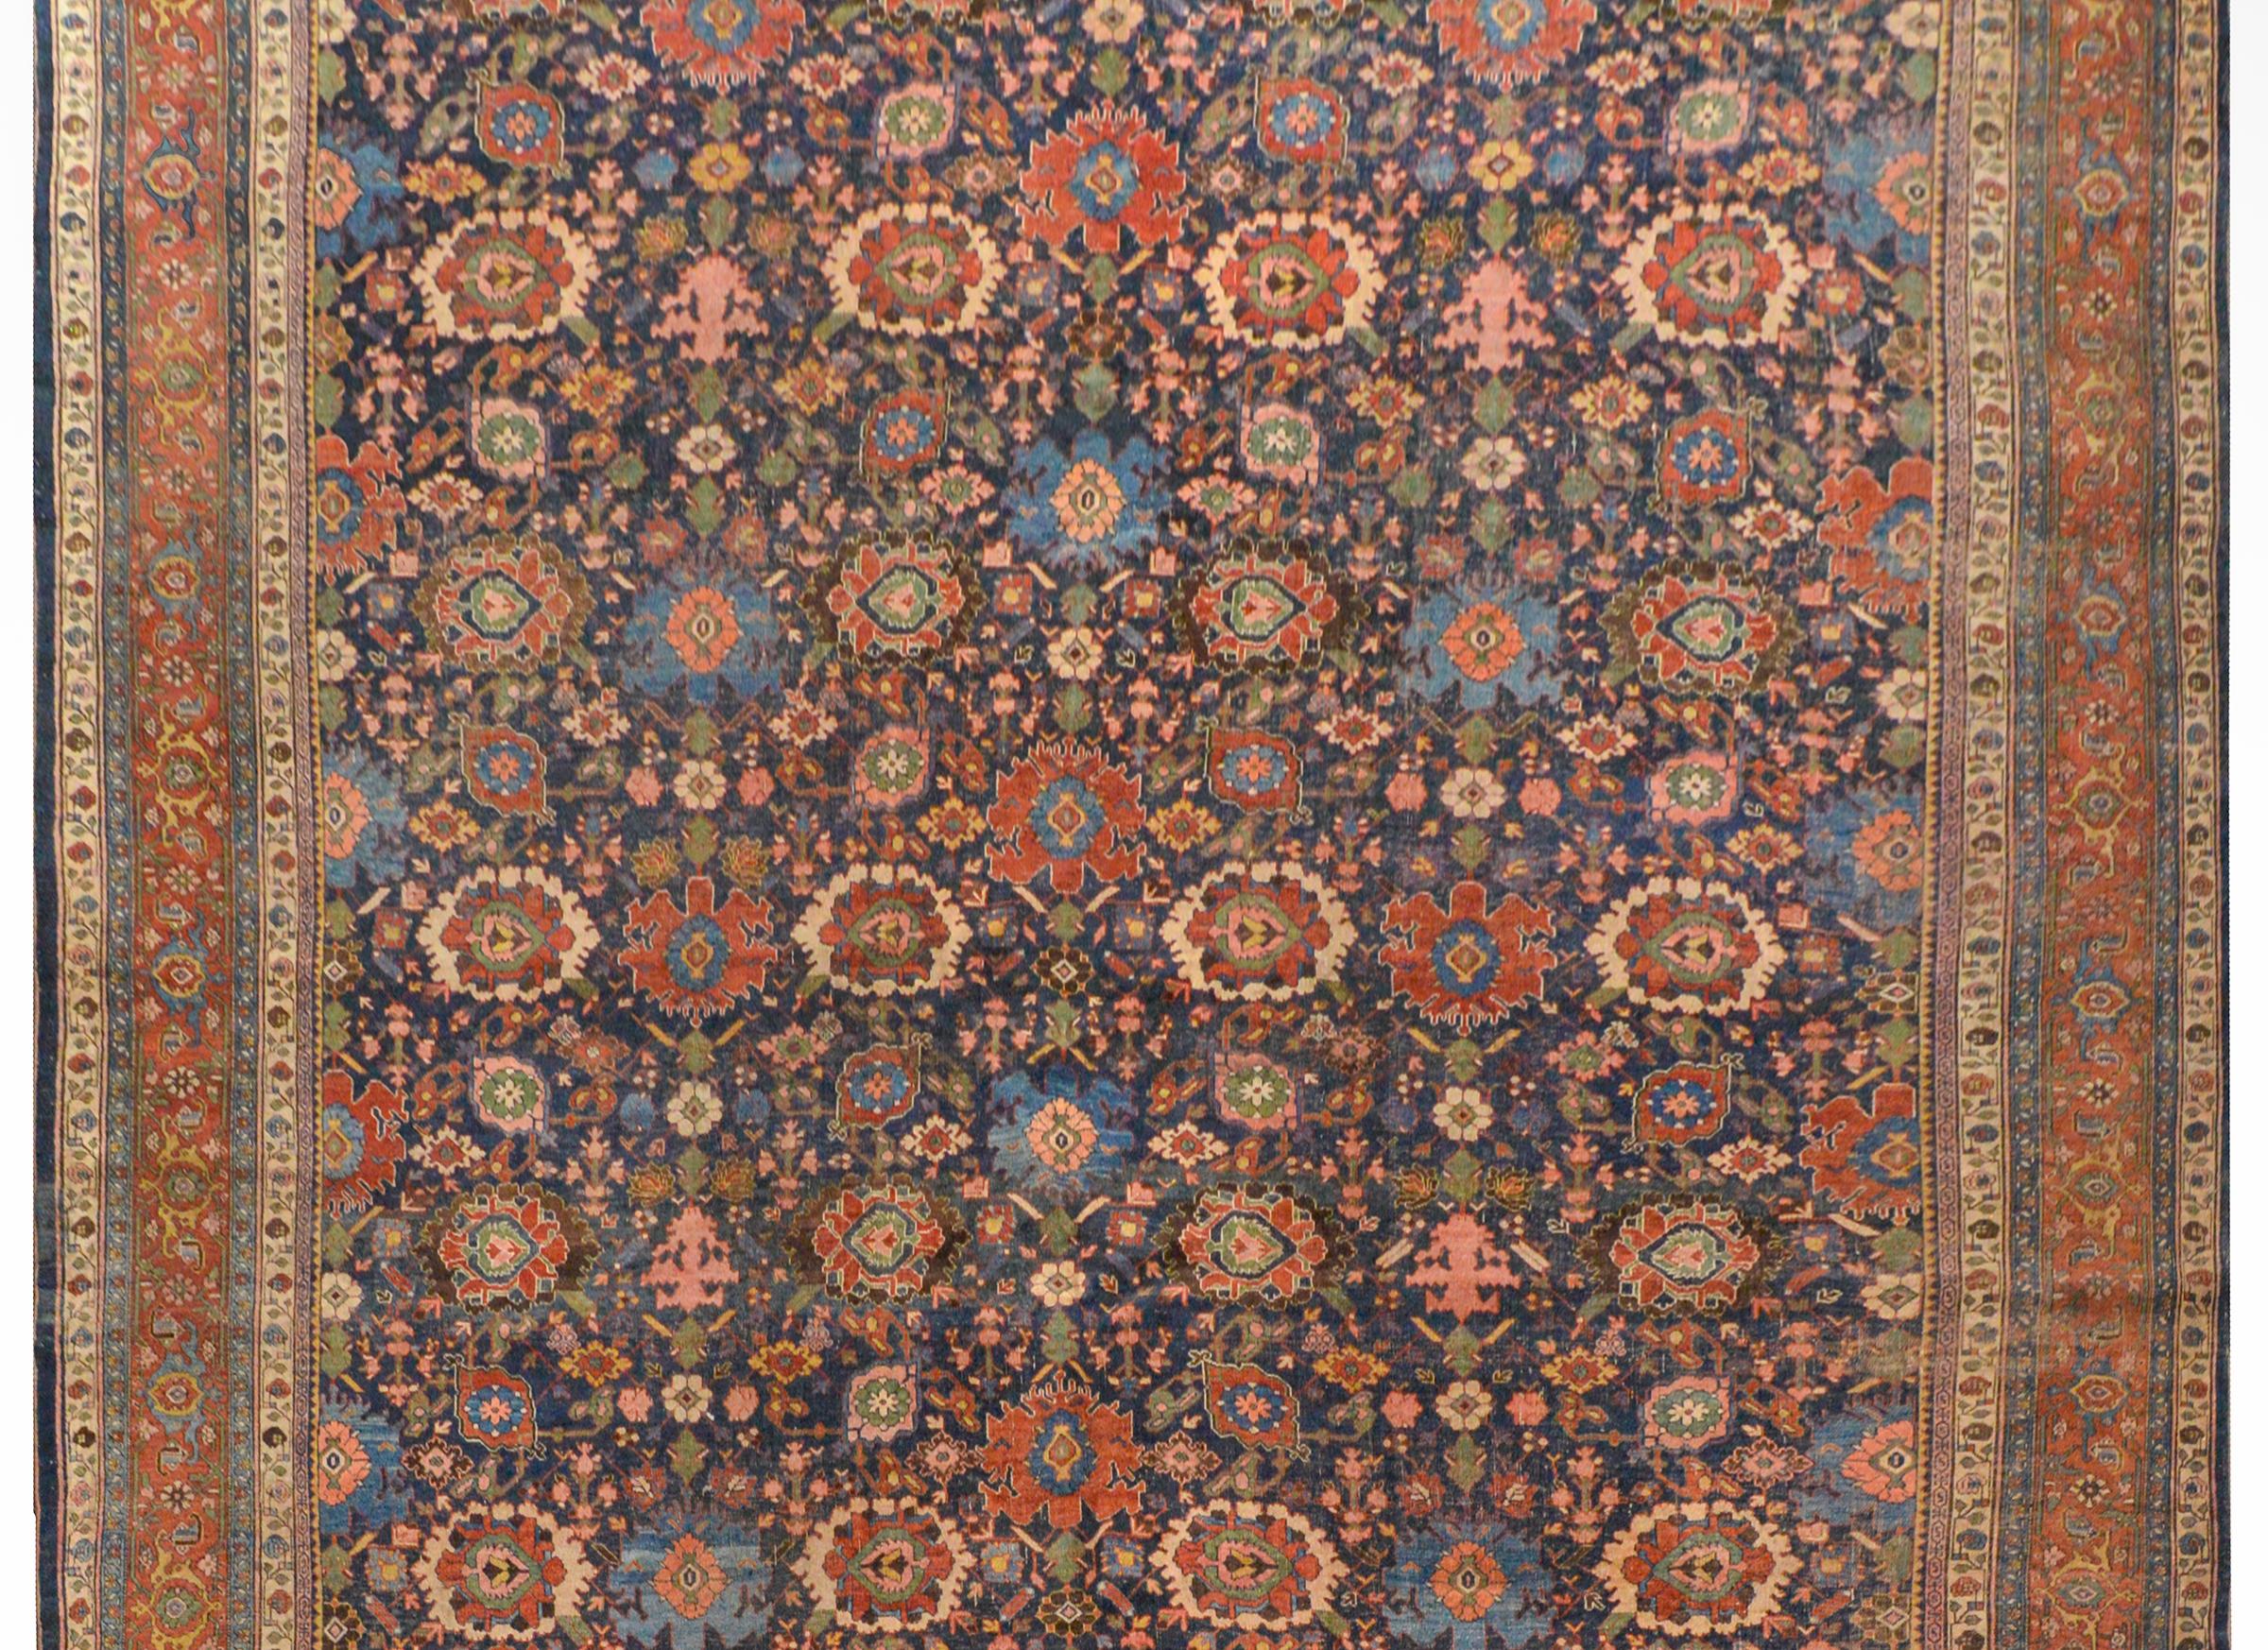 An incredible late 19th century Persian palatial-scale Bidjar rug with a fantastic large-scale floral pattern woven in crimson, indigo, gold, green, brown, and pink, all on a dark indigo background. The border is complex with a wide floral patterned